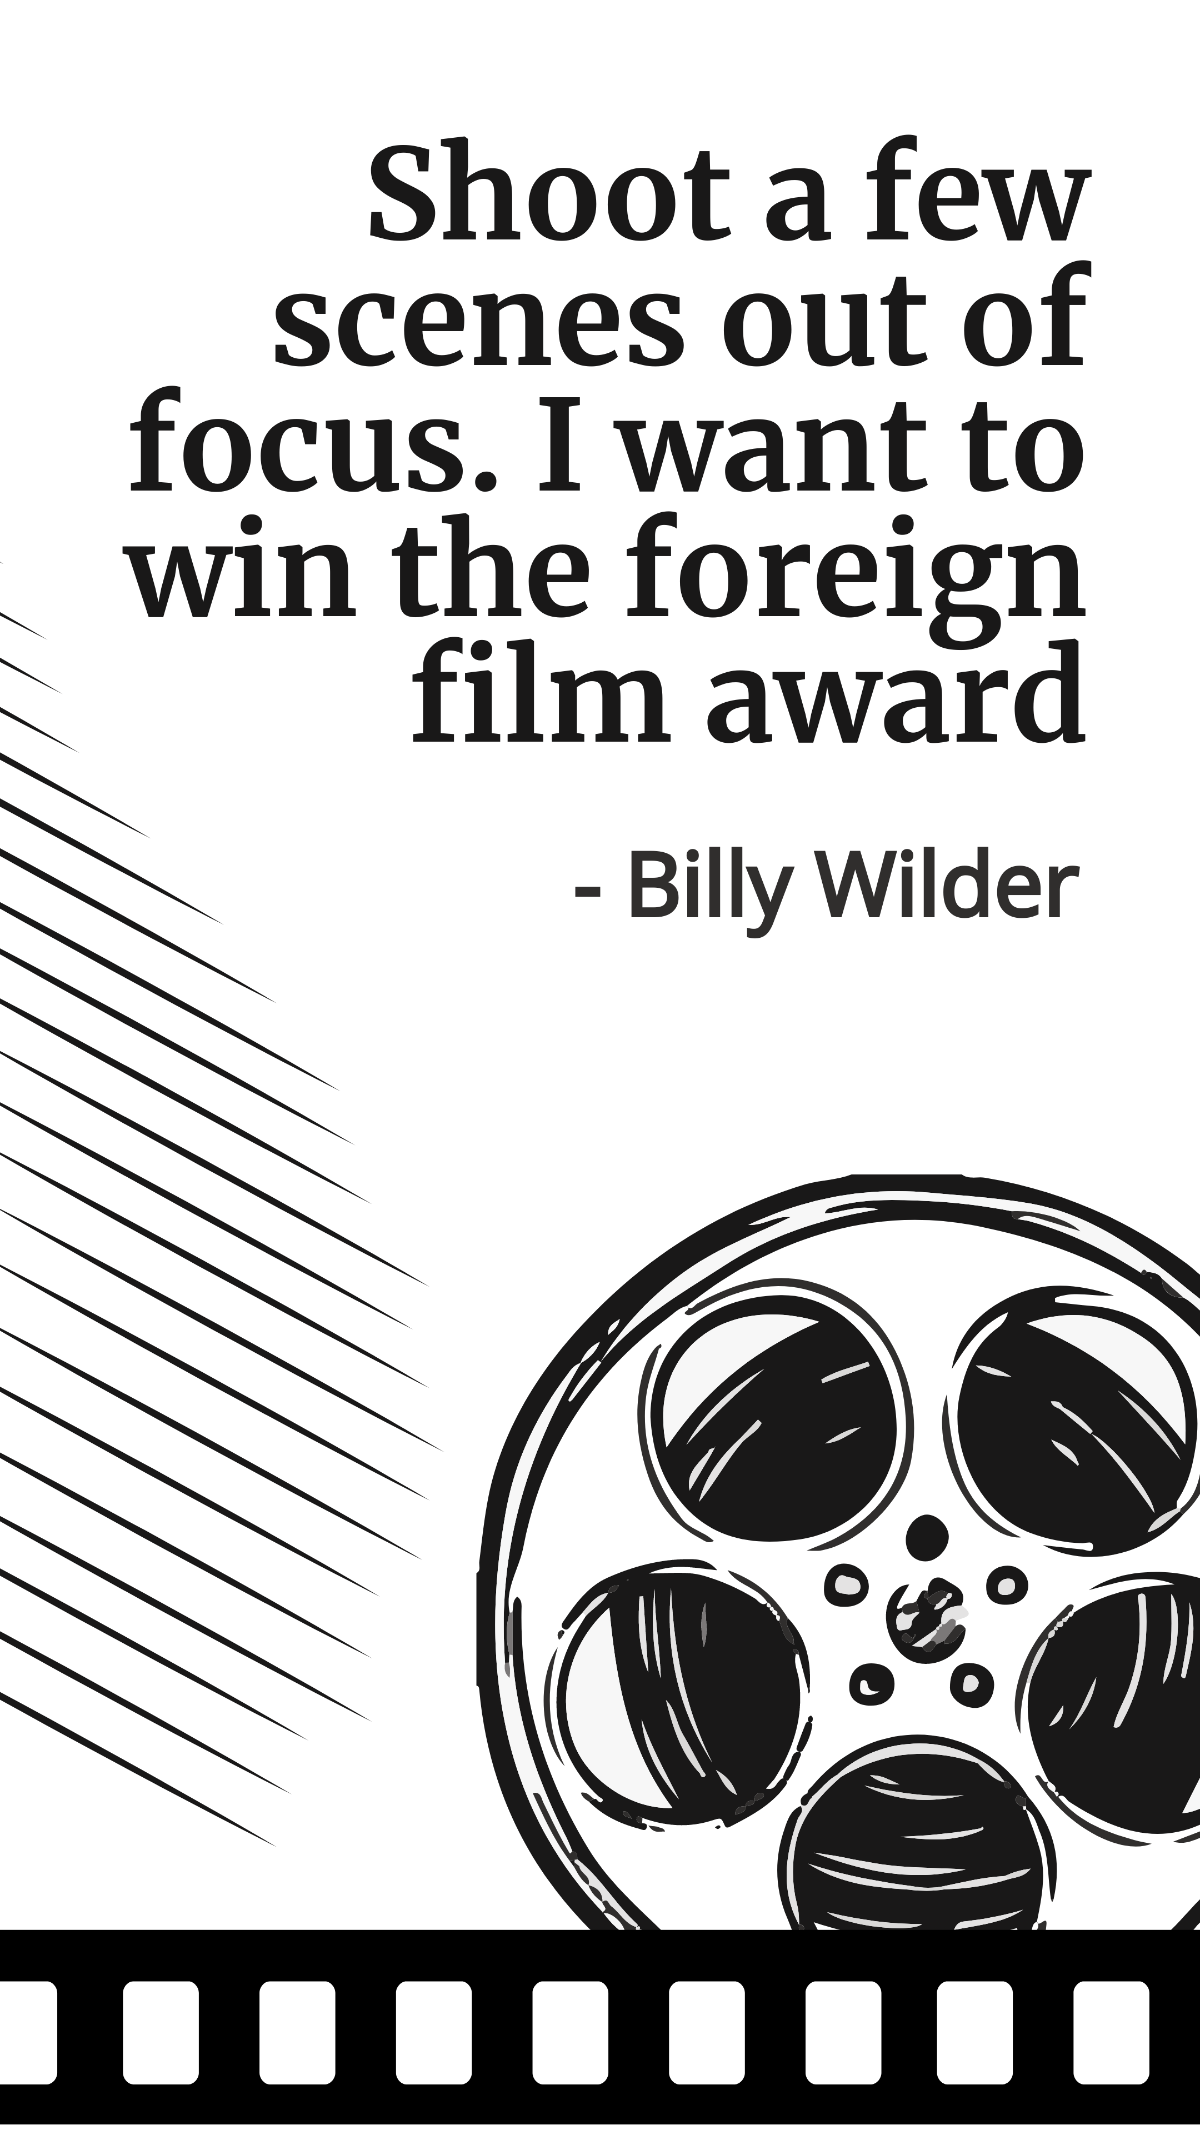 Billy Wilder - Shoot a few scenes out of focus. I want to win the foreign film award Template